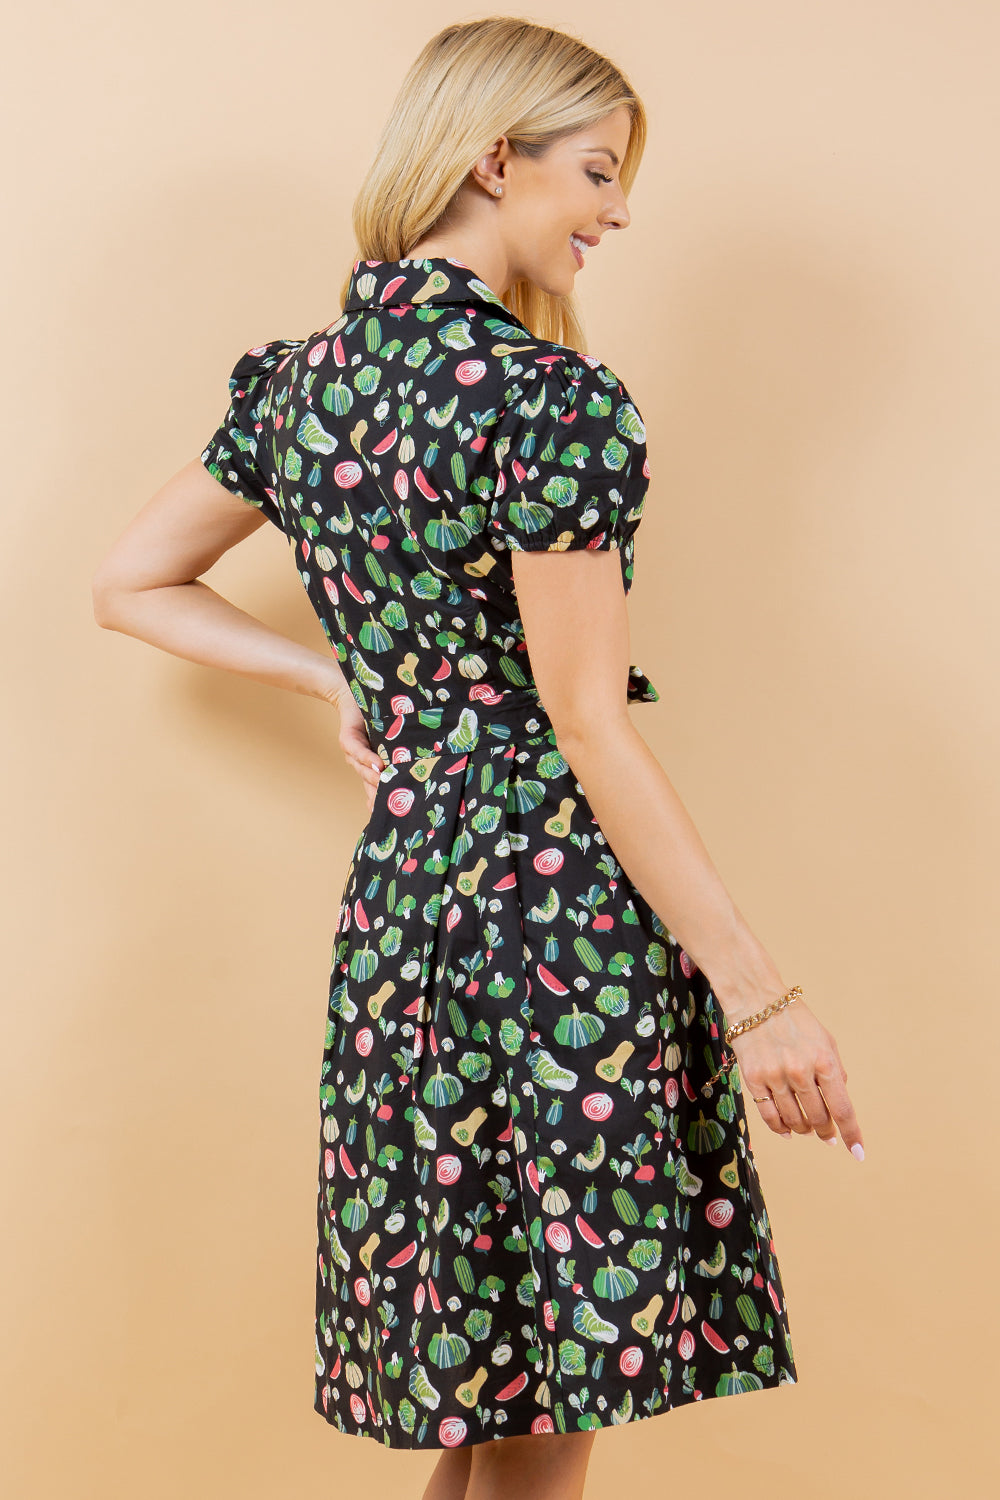 Vegetable Print Fit and Flare Dress